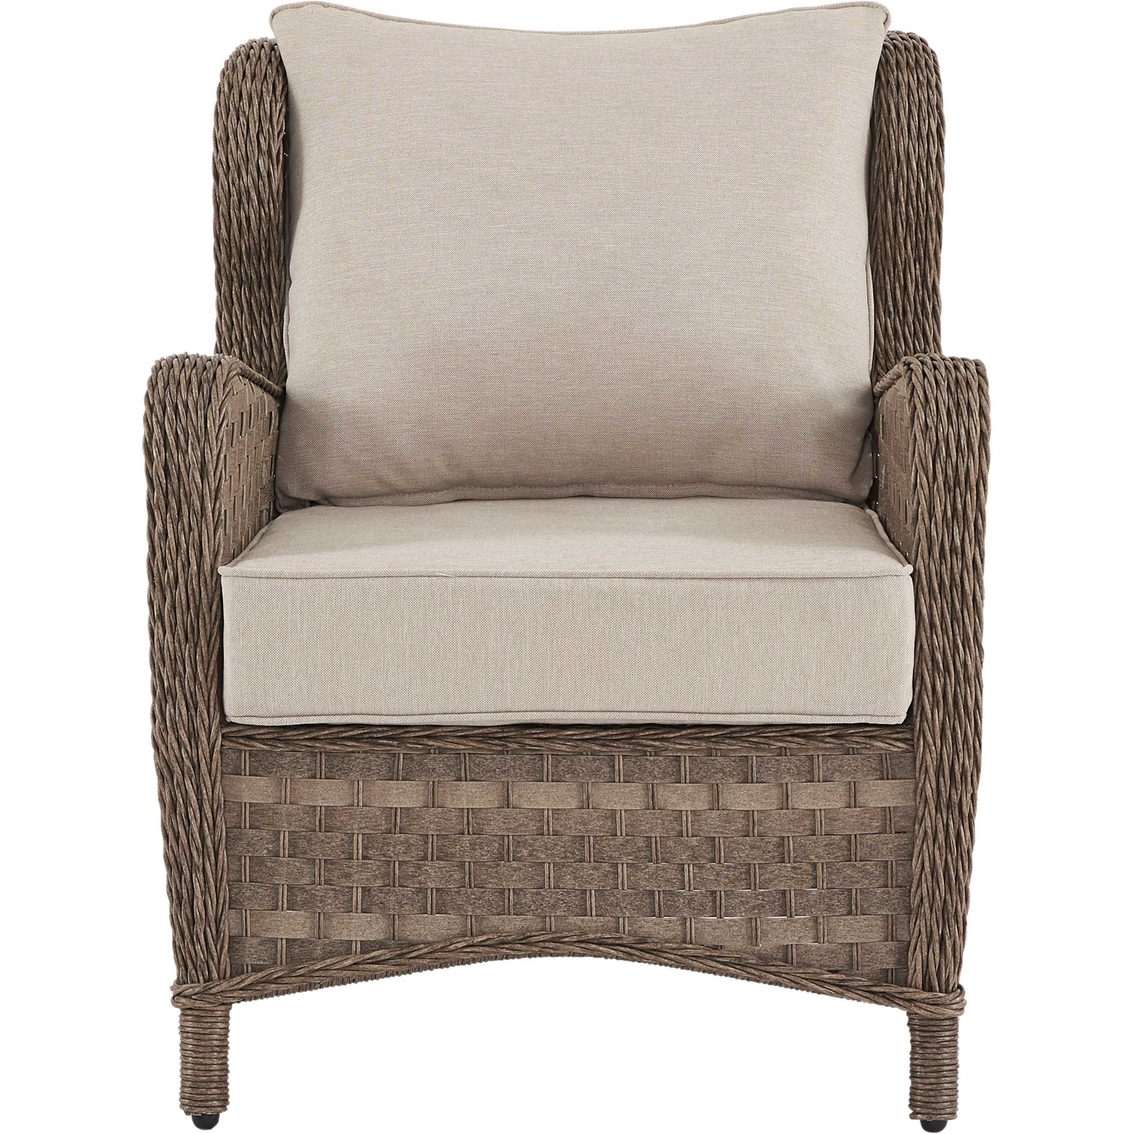 Signature Design by Ashley Clear Ridge Outdoor Lounge Chair 2 pk. - Image 3 of 6